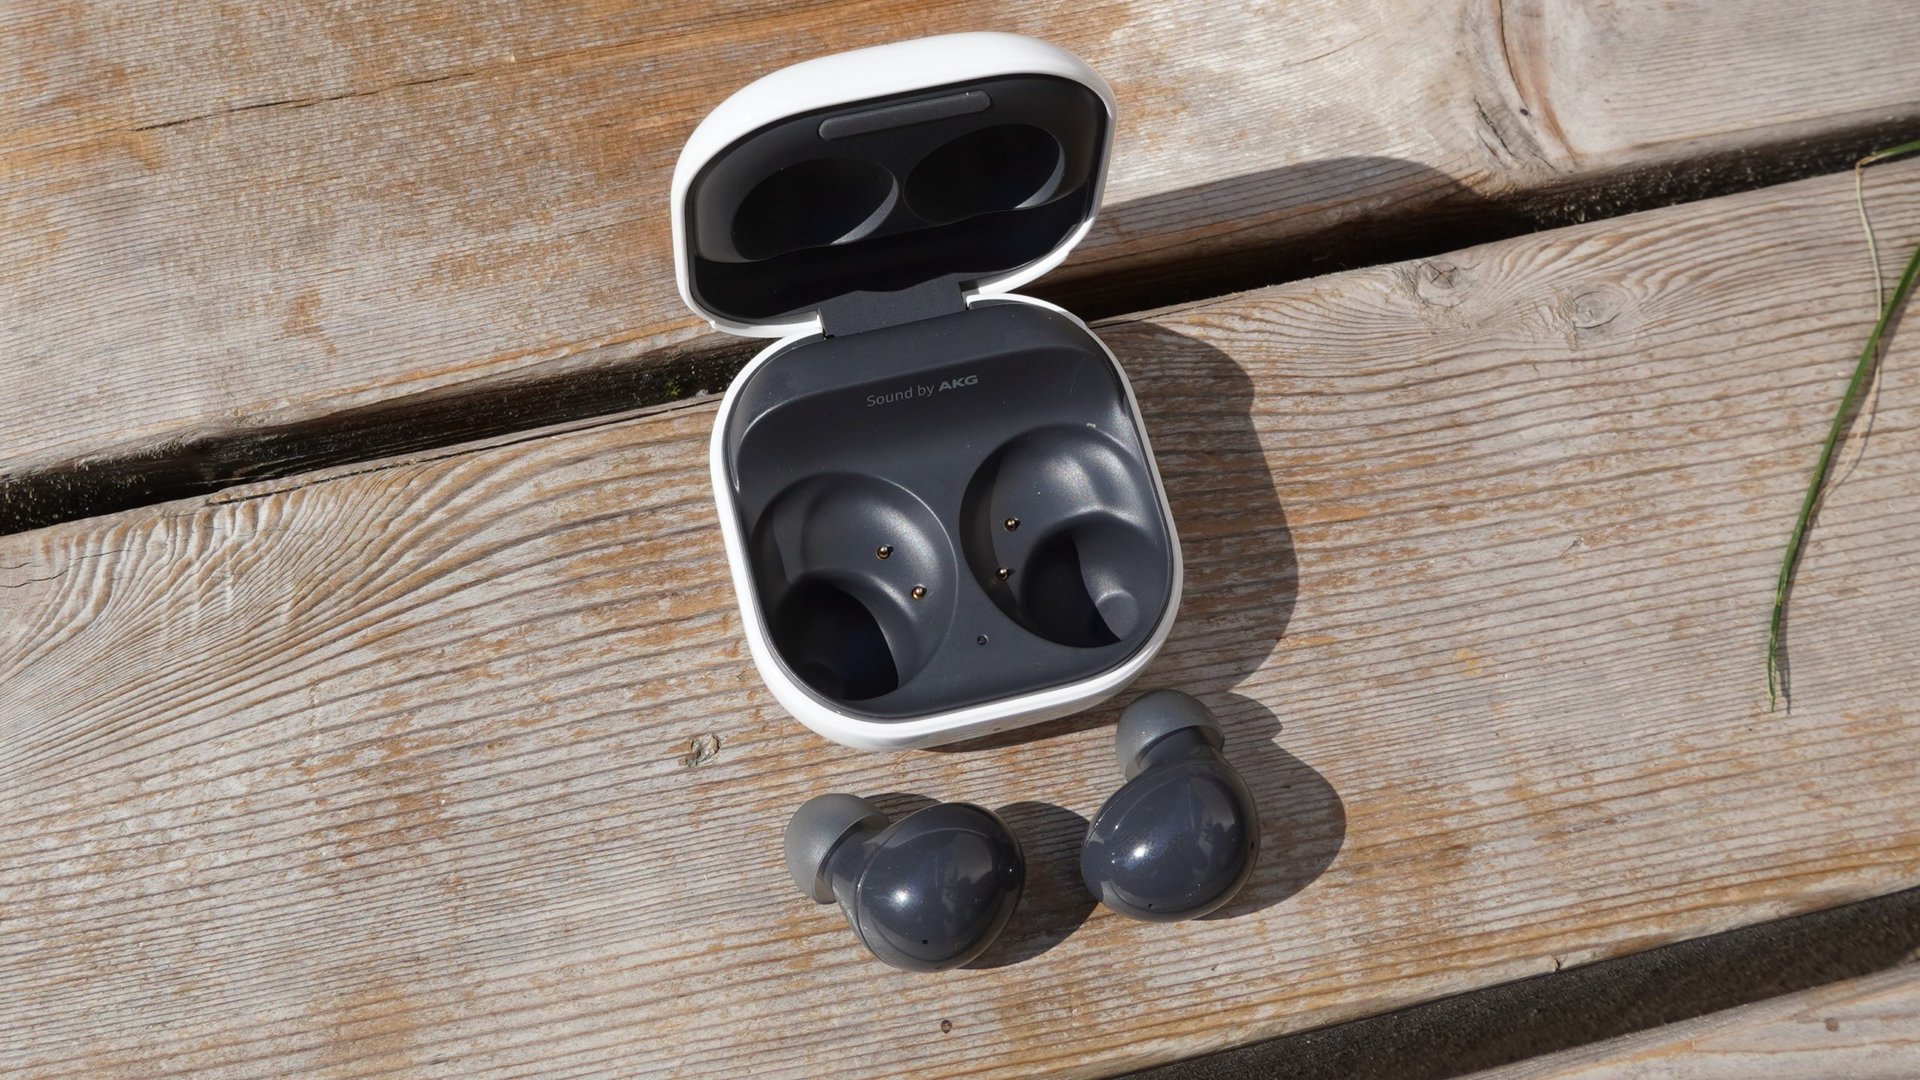 The Galaxy Buds 2 next to their case sitting on a wooden bench outdoors.